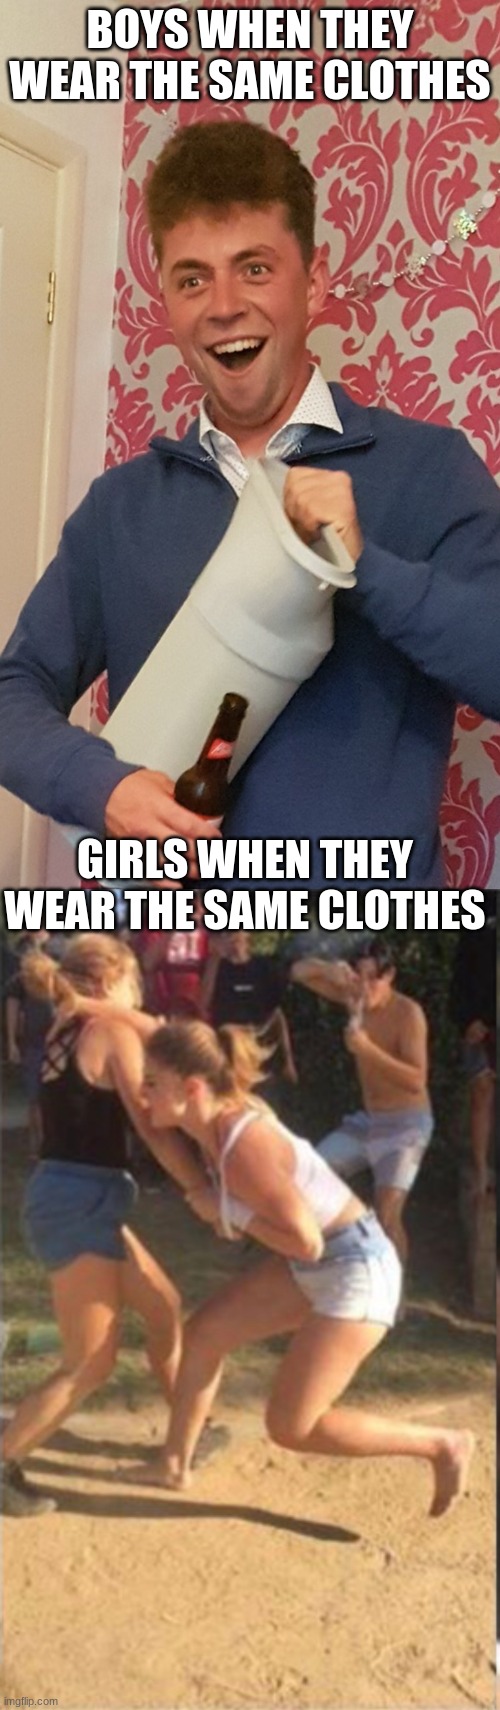 BOYS WHEN THEY WEAR THE SAME CLOTHES; GIRLS WHEN THEY WEAR THE SAME CLOTHES | image tagged in smiling weirdo,two girls fighting | made w/ Imgflip meme maker